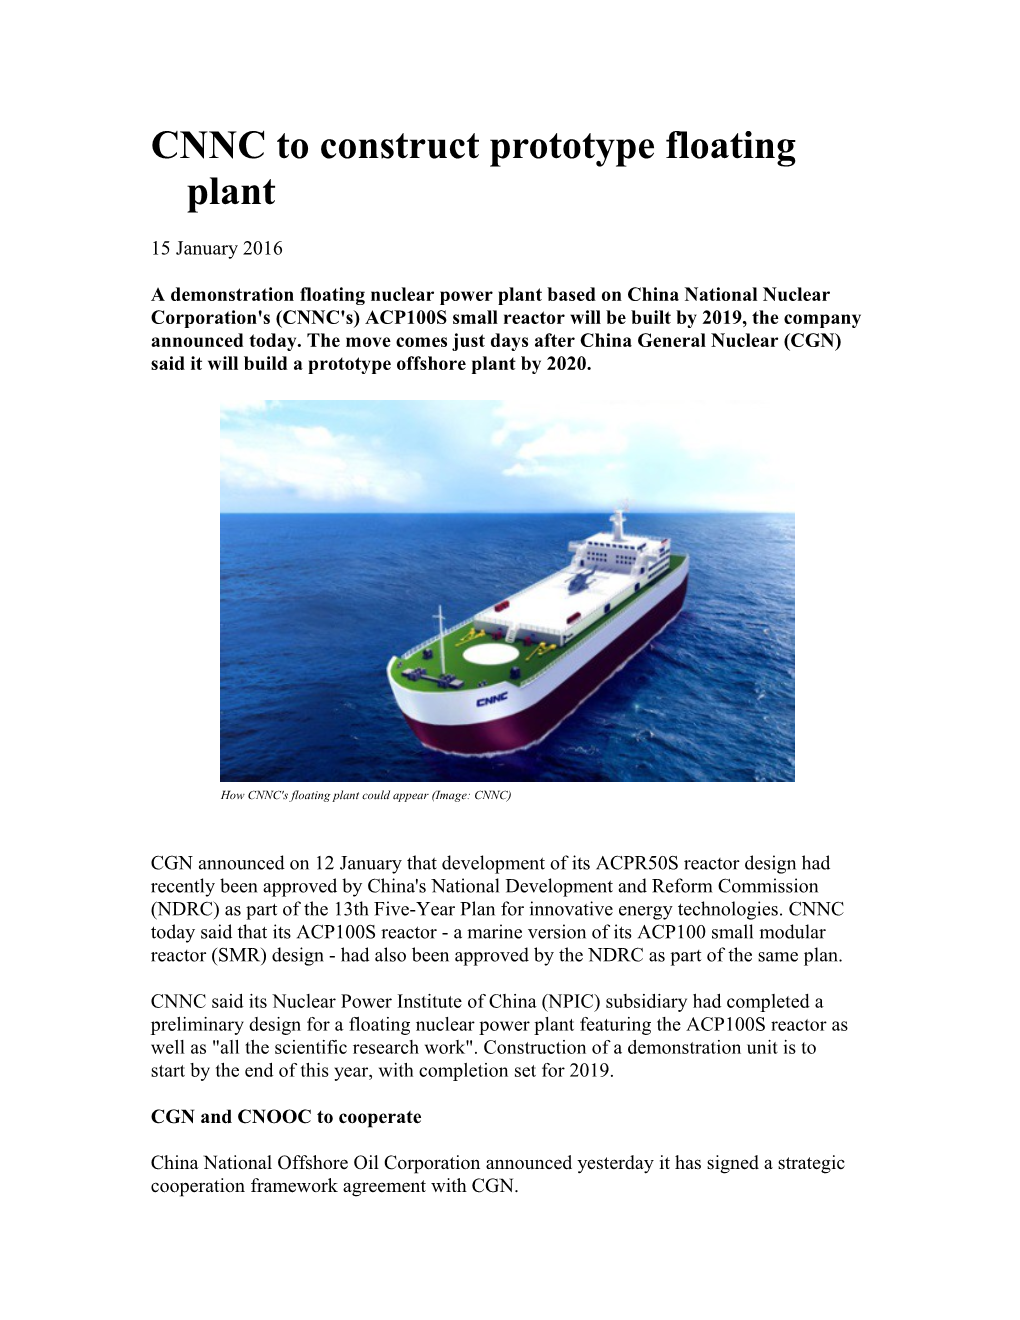 CNNC to Construct Prototype Floating Plant